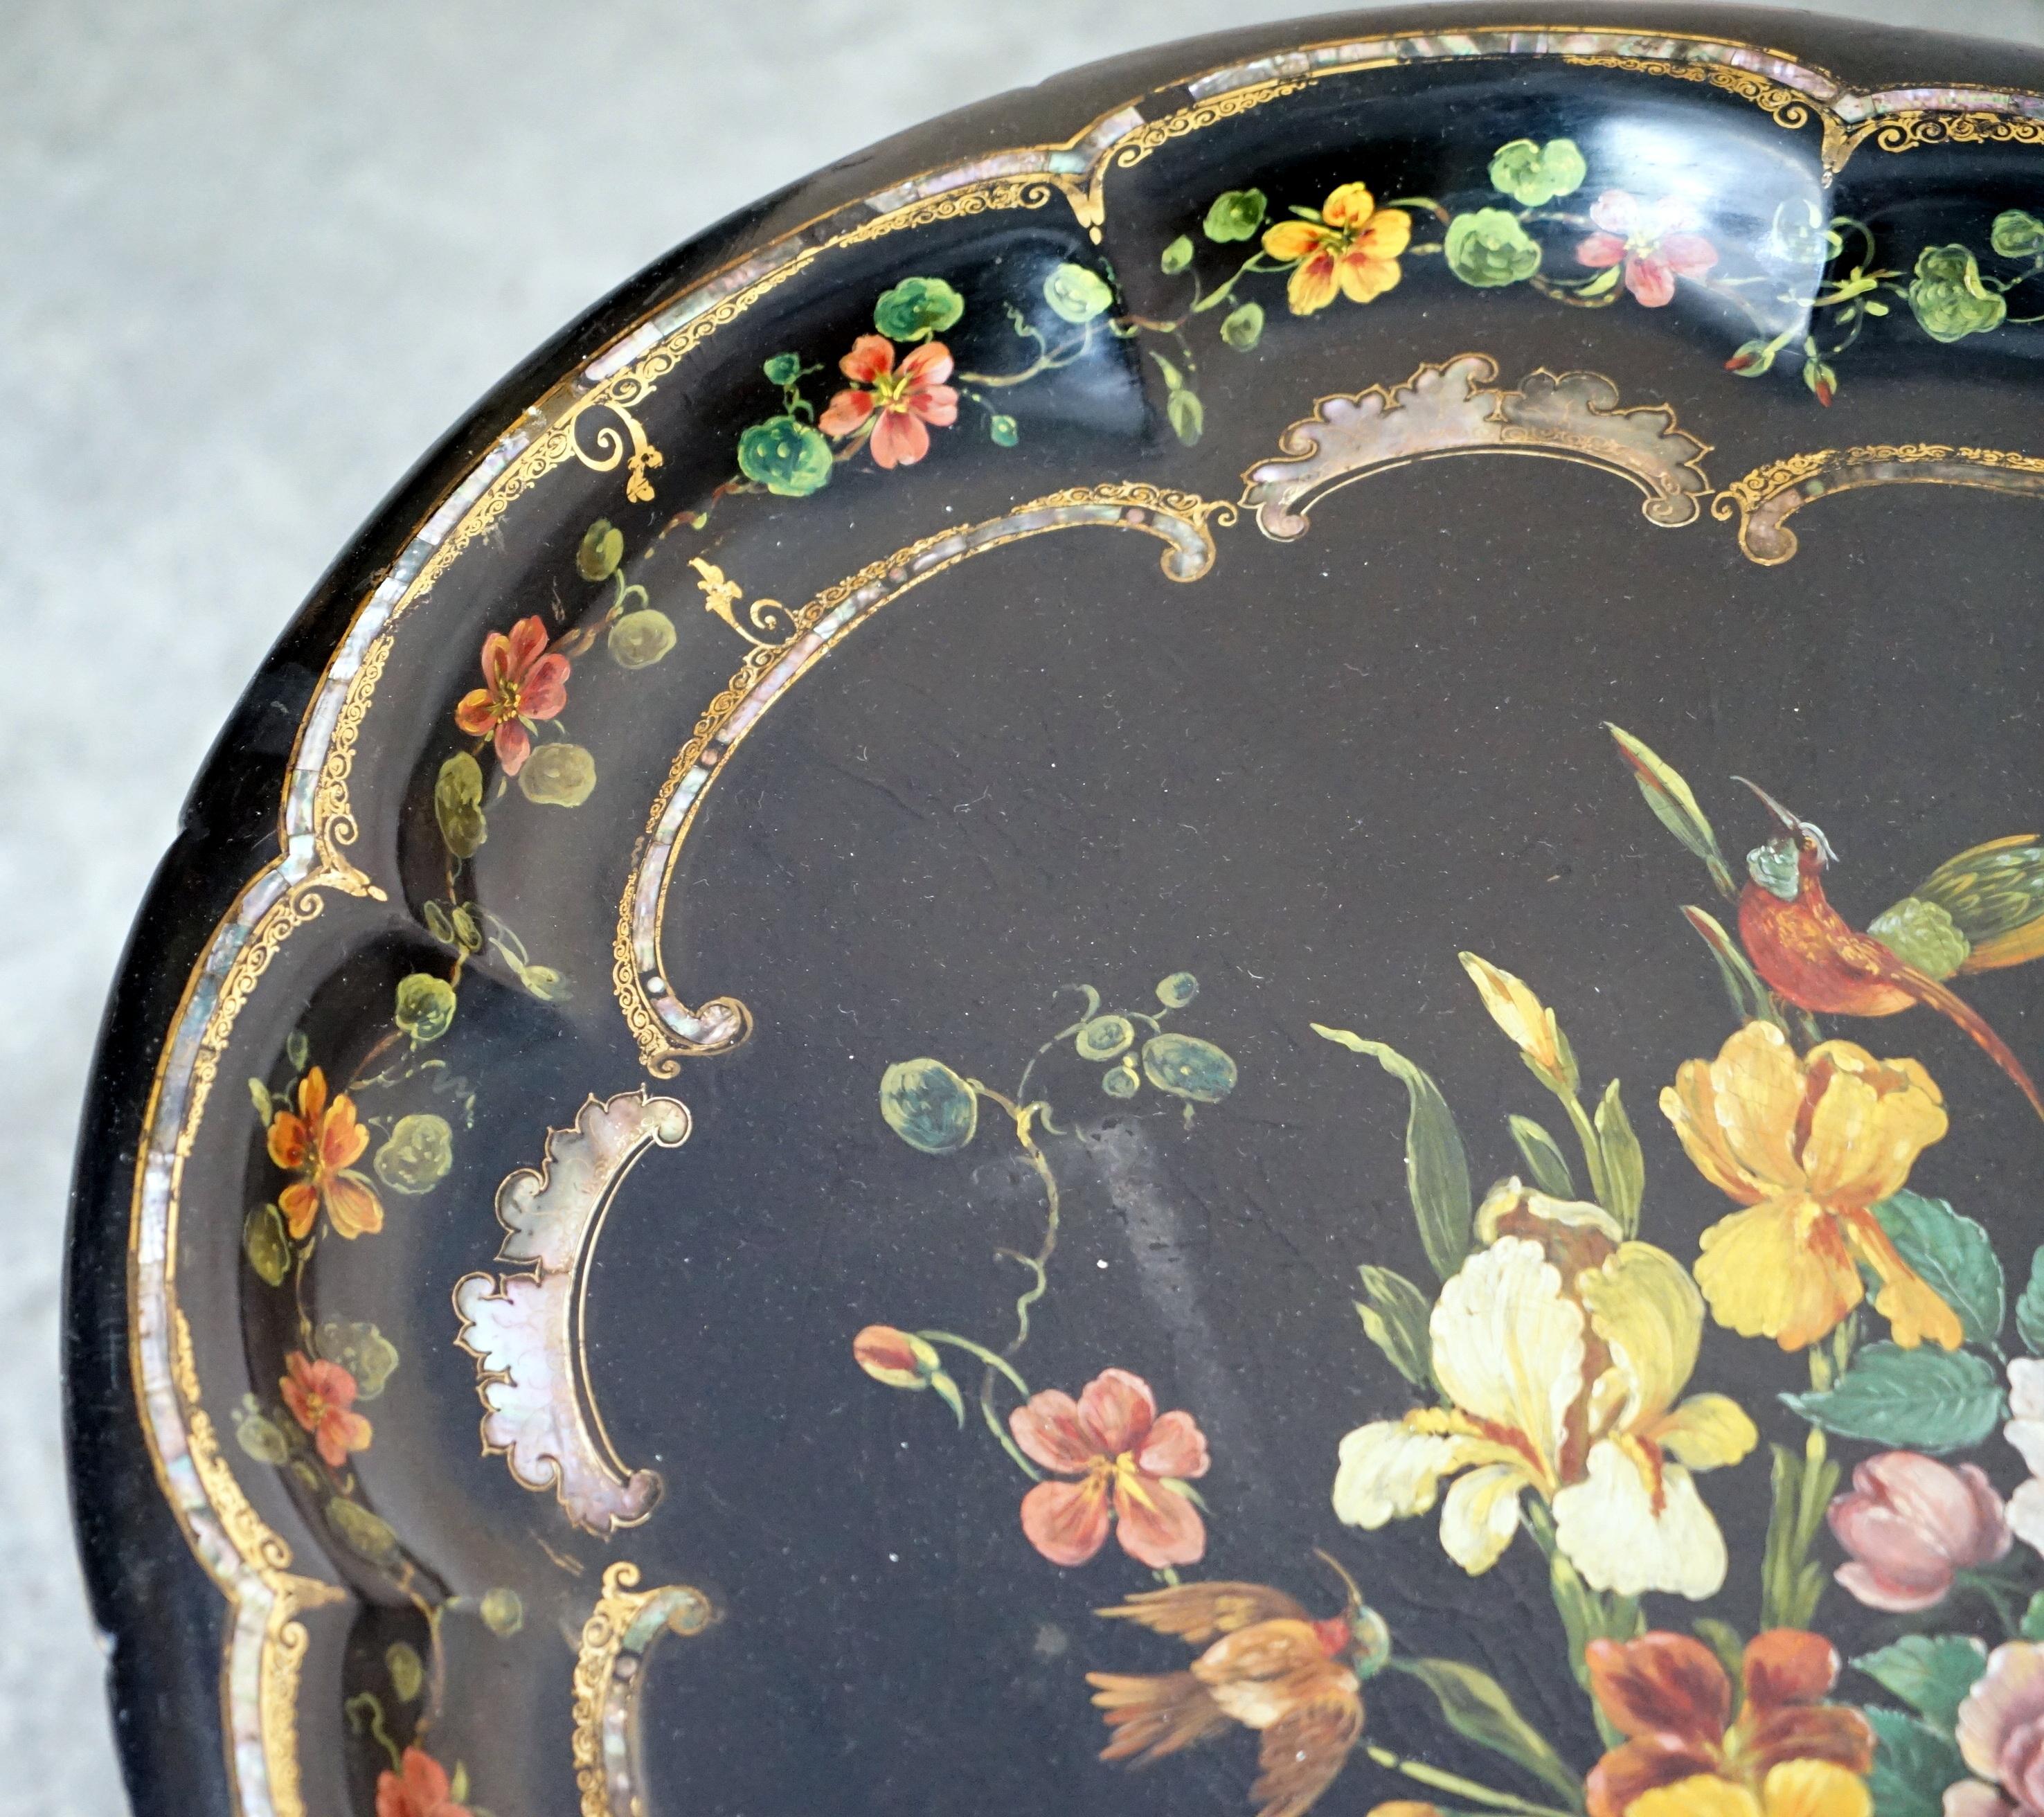 Mother-of-Pearl Antique Regency circa 1810-1820 Mother of Pearl Inlaid Hand Painted Tray Table